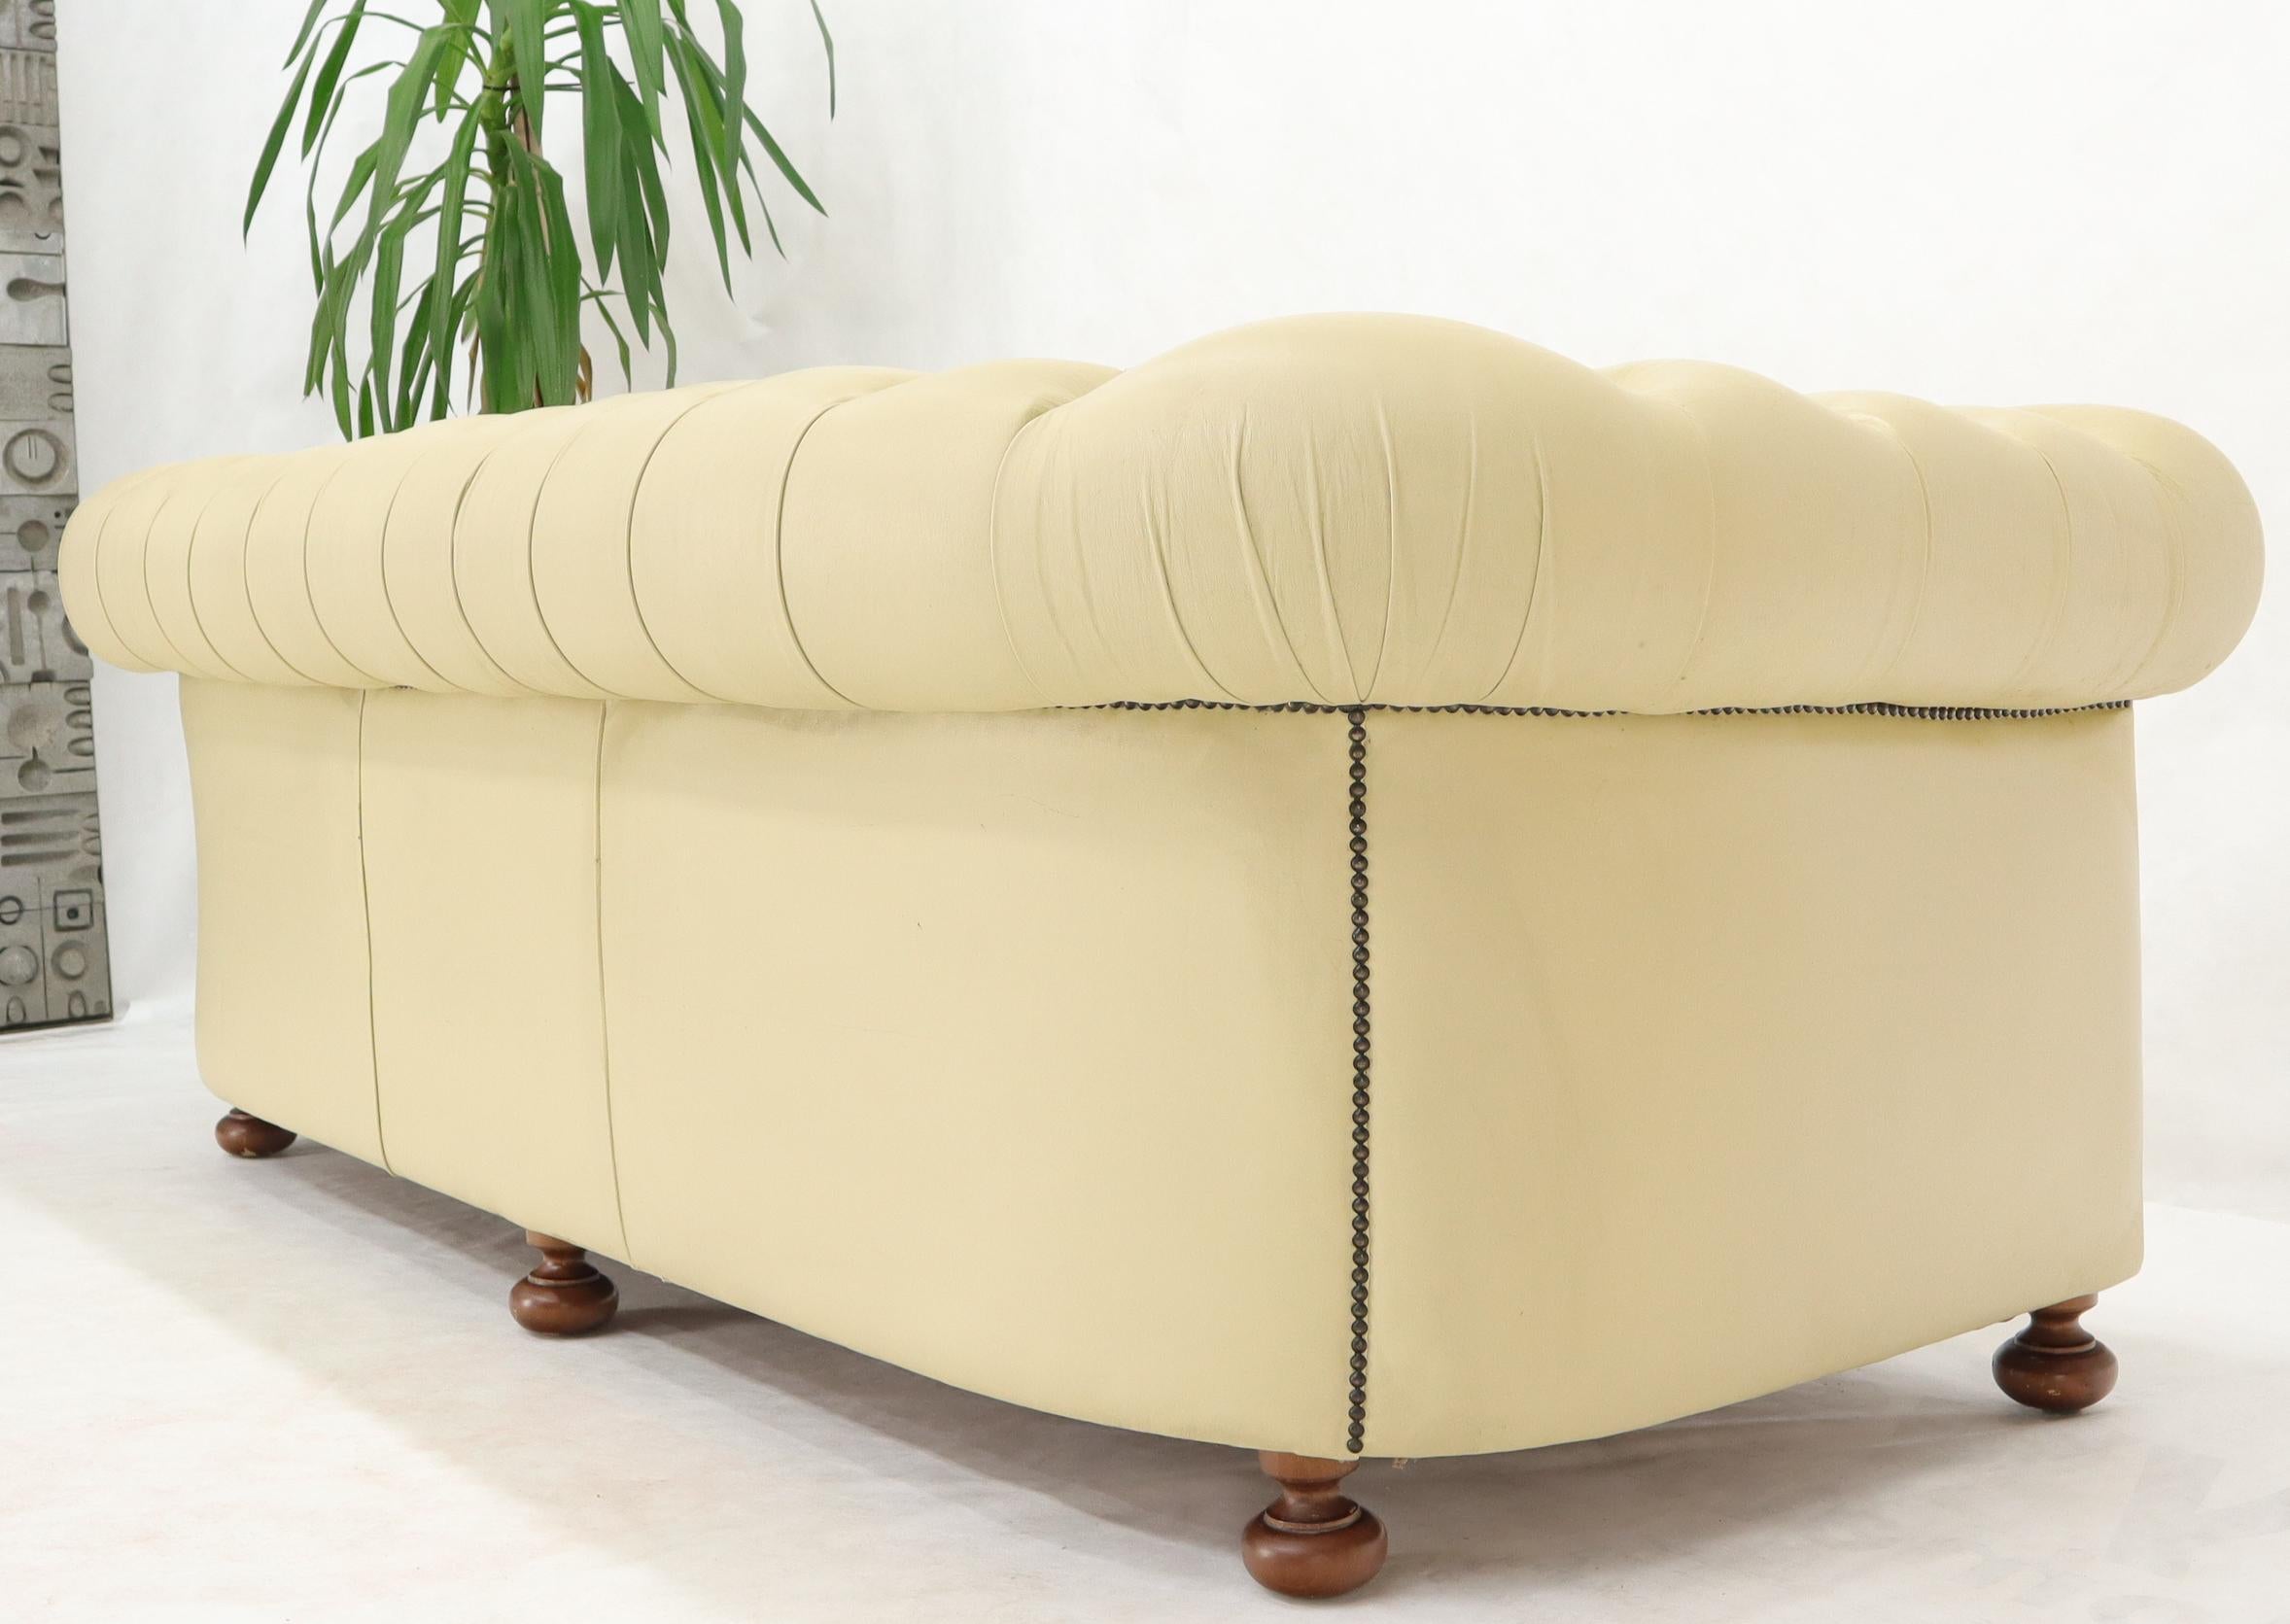 Cream Tufted Leather Chesterfield Sofa 4